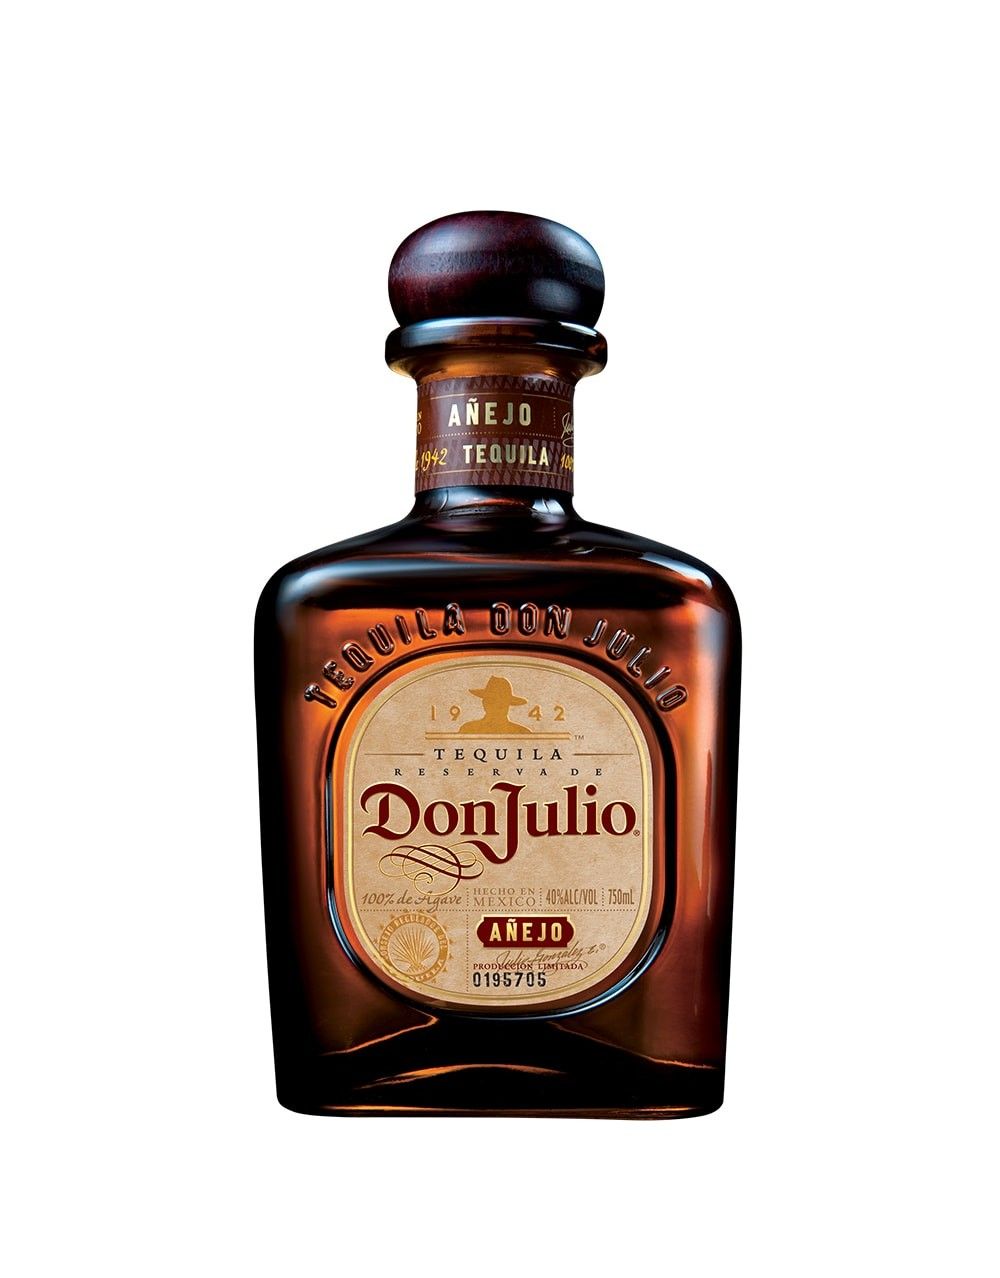 Don Julio Añejo Tequila | Buy Online or Send as a Gift